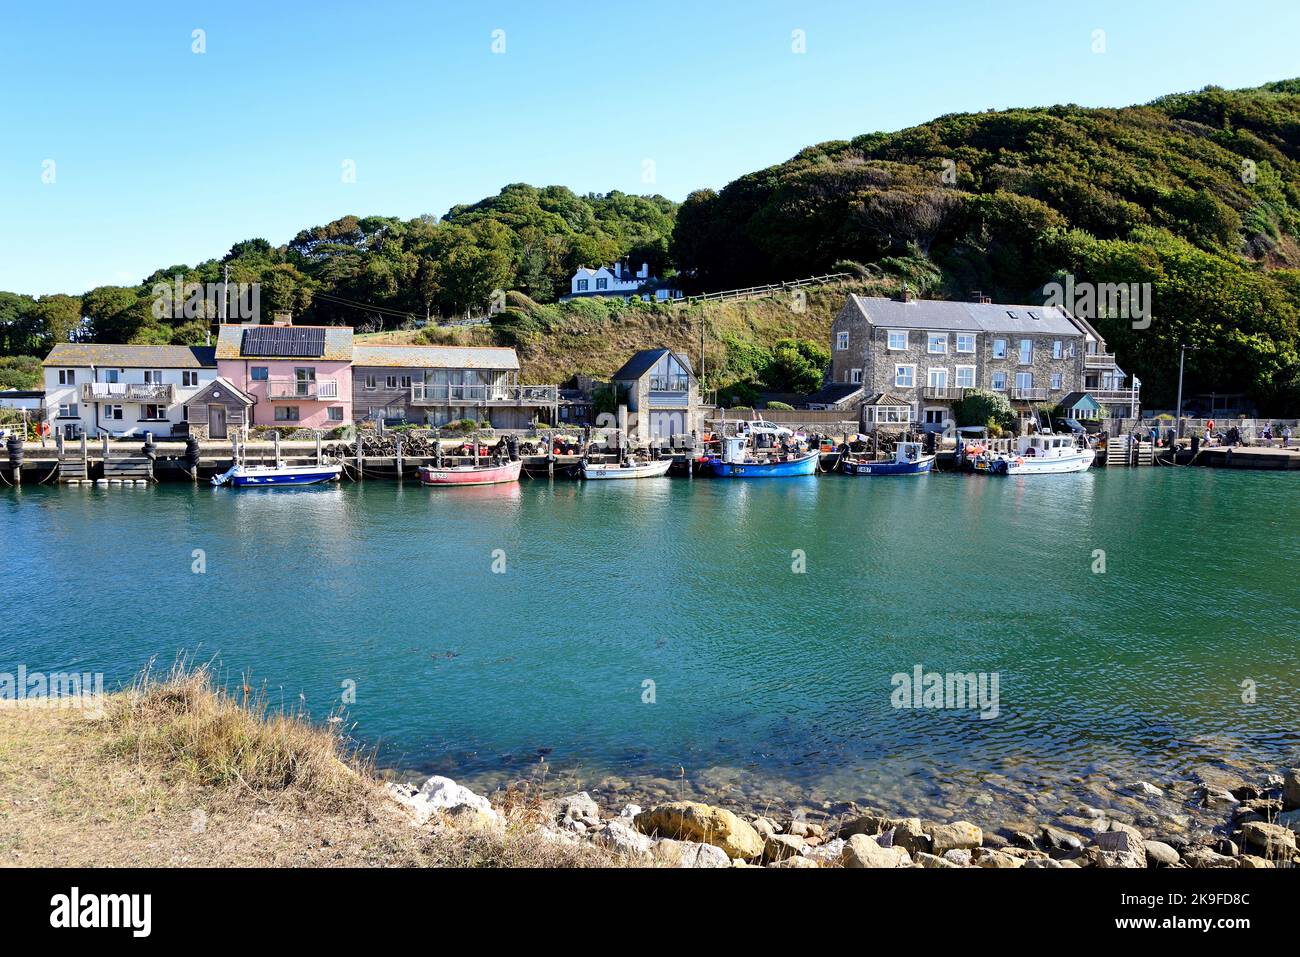 Fishing boats moored alongside the waterfront with buildings to the rear, Axmouth, Devon, UK, Europe. Stock Photo